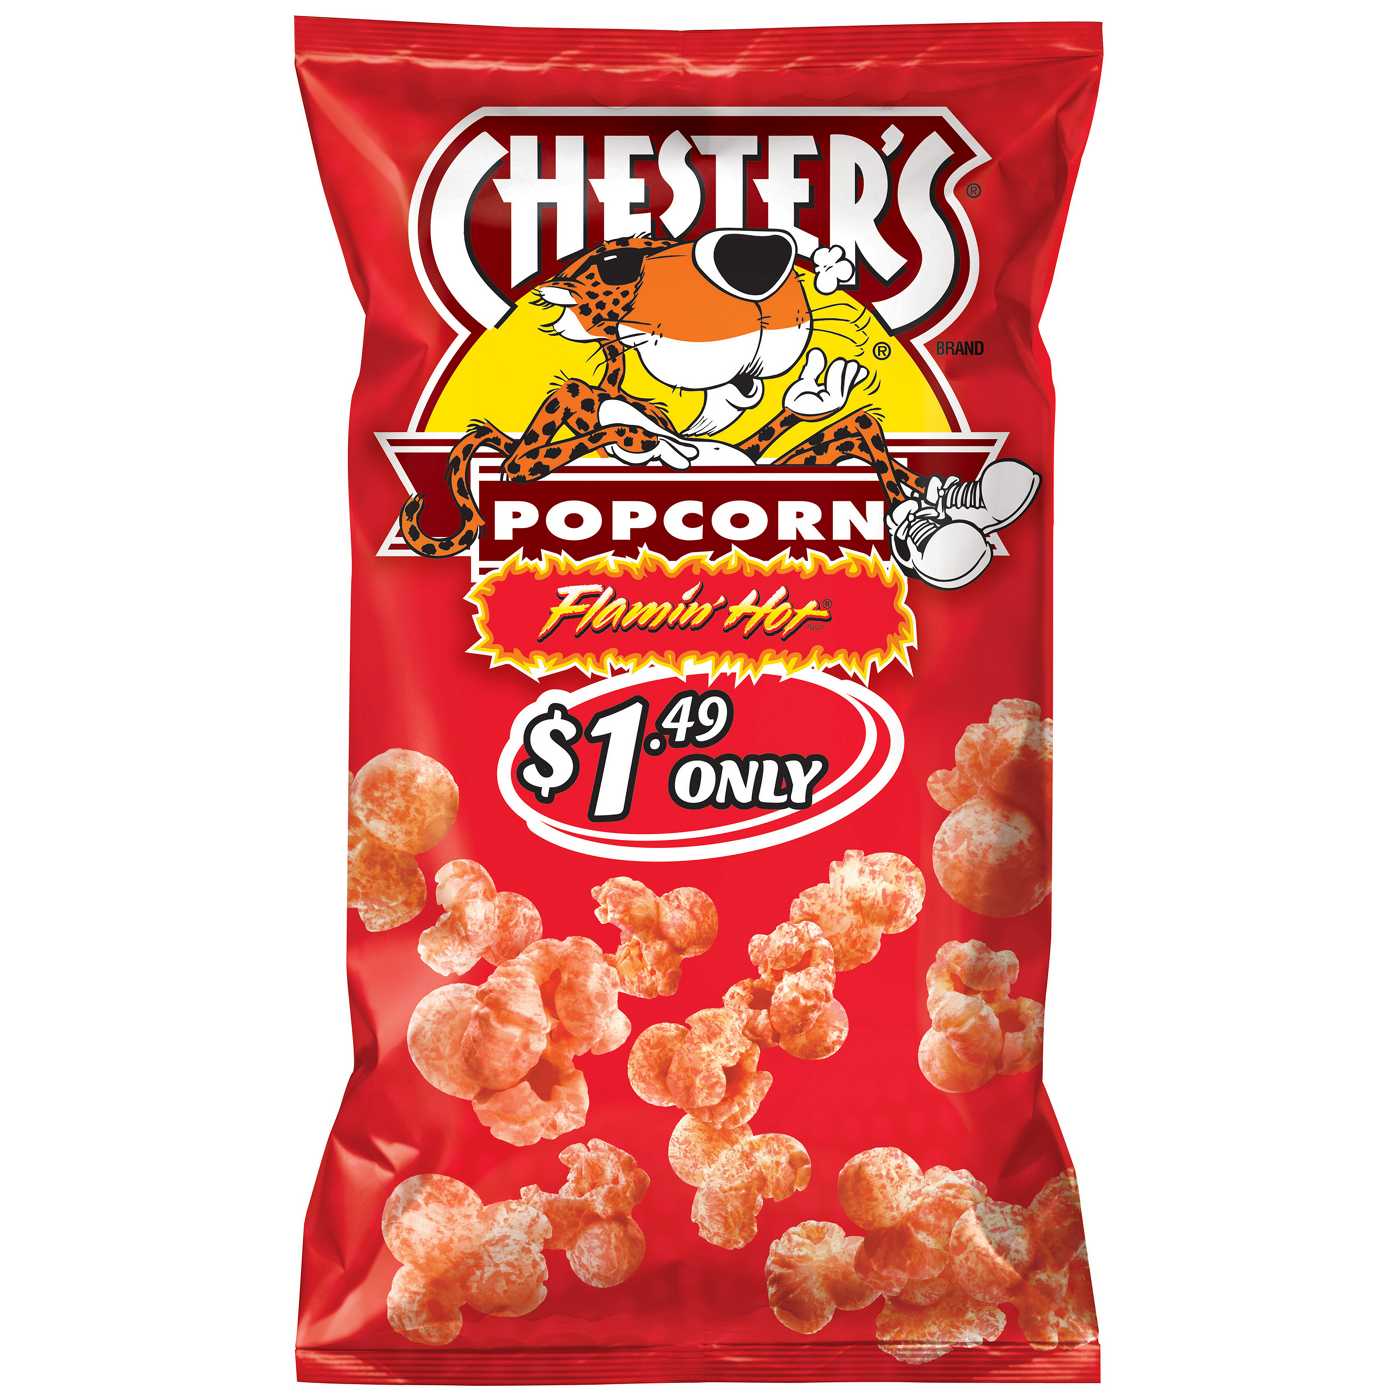 Chester's Flamin' Hot Popcorn; image 1 of 2